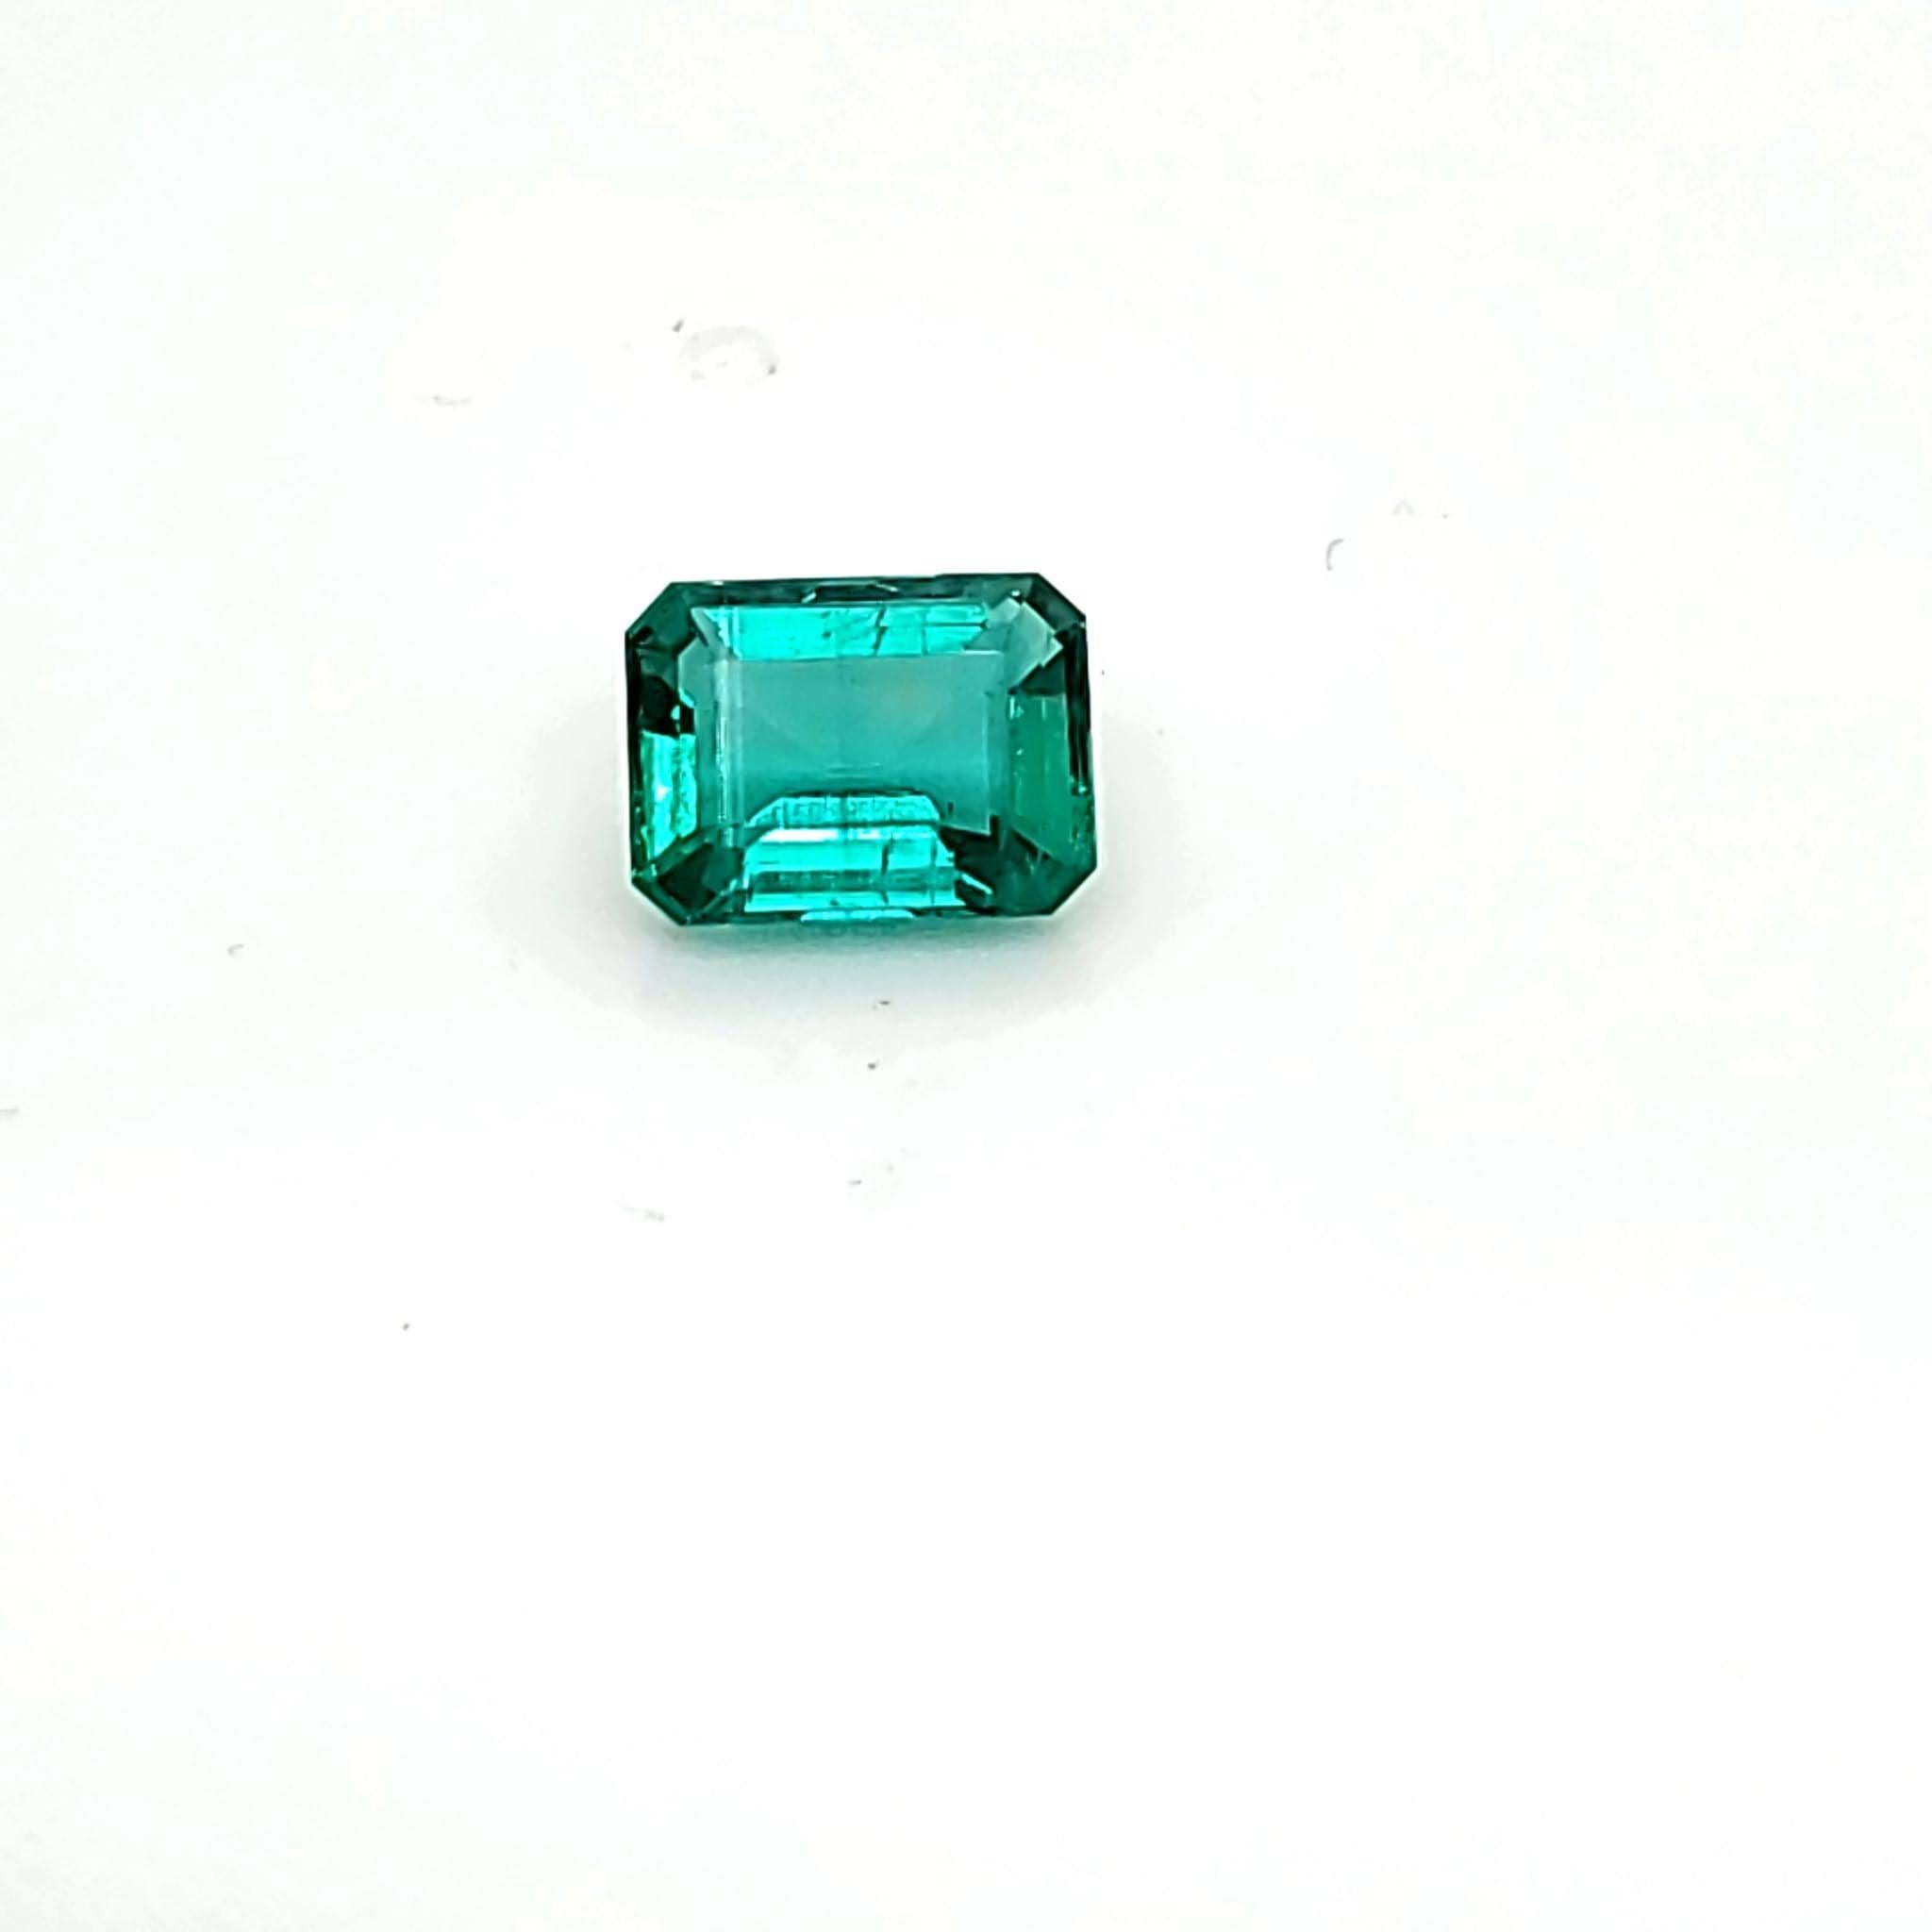 2.25 carats Natural Emerald Precioust Gemstone, ethically sourced from Colombia, GIA Certified with a slight F1 treatment, very clean and transparent gemstone, much more beautiful in person than photographed, intense green.

Only one available for